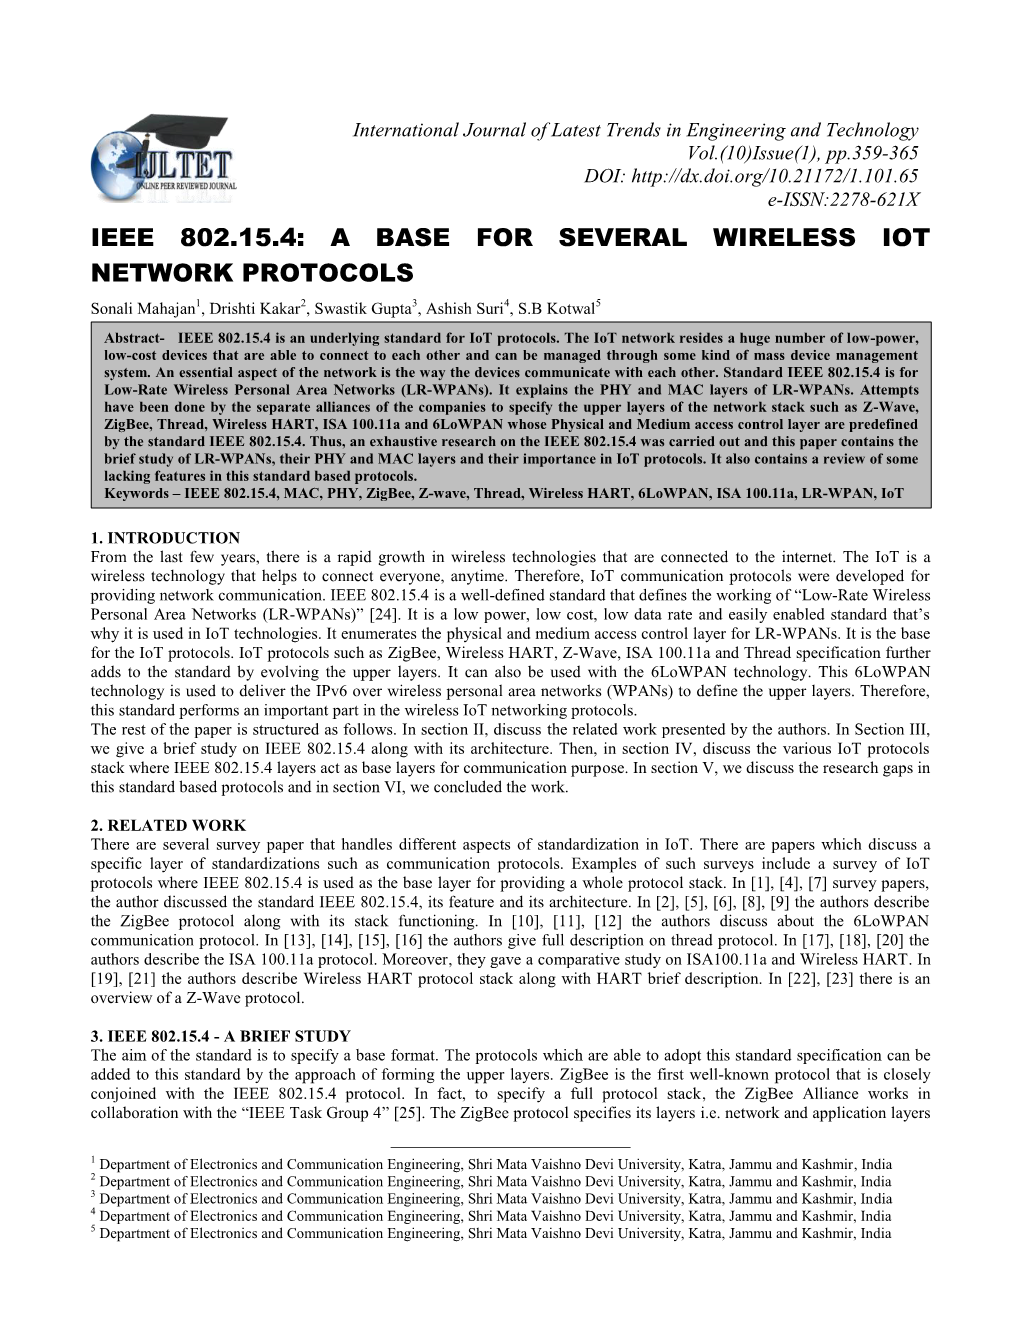 Ieee 802.15.4: a Base for Several Wireless Iot Network Protocols